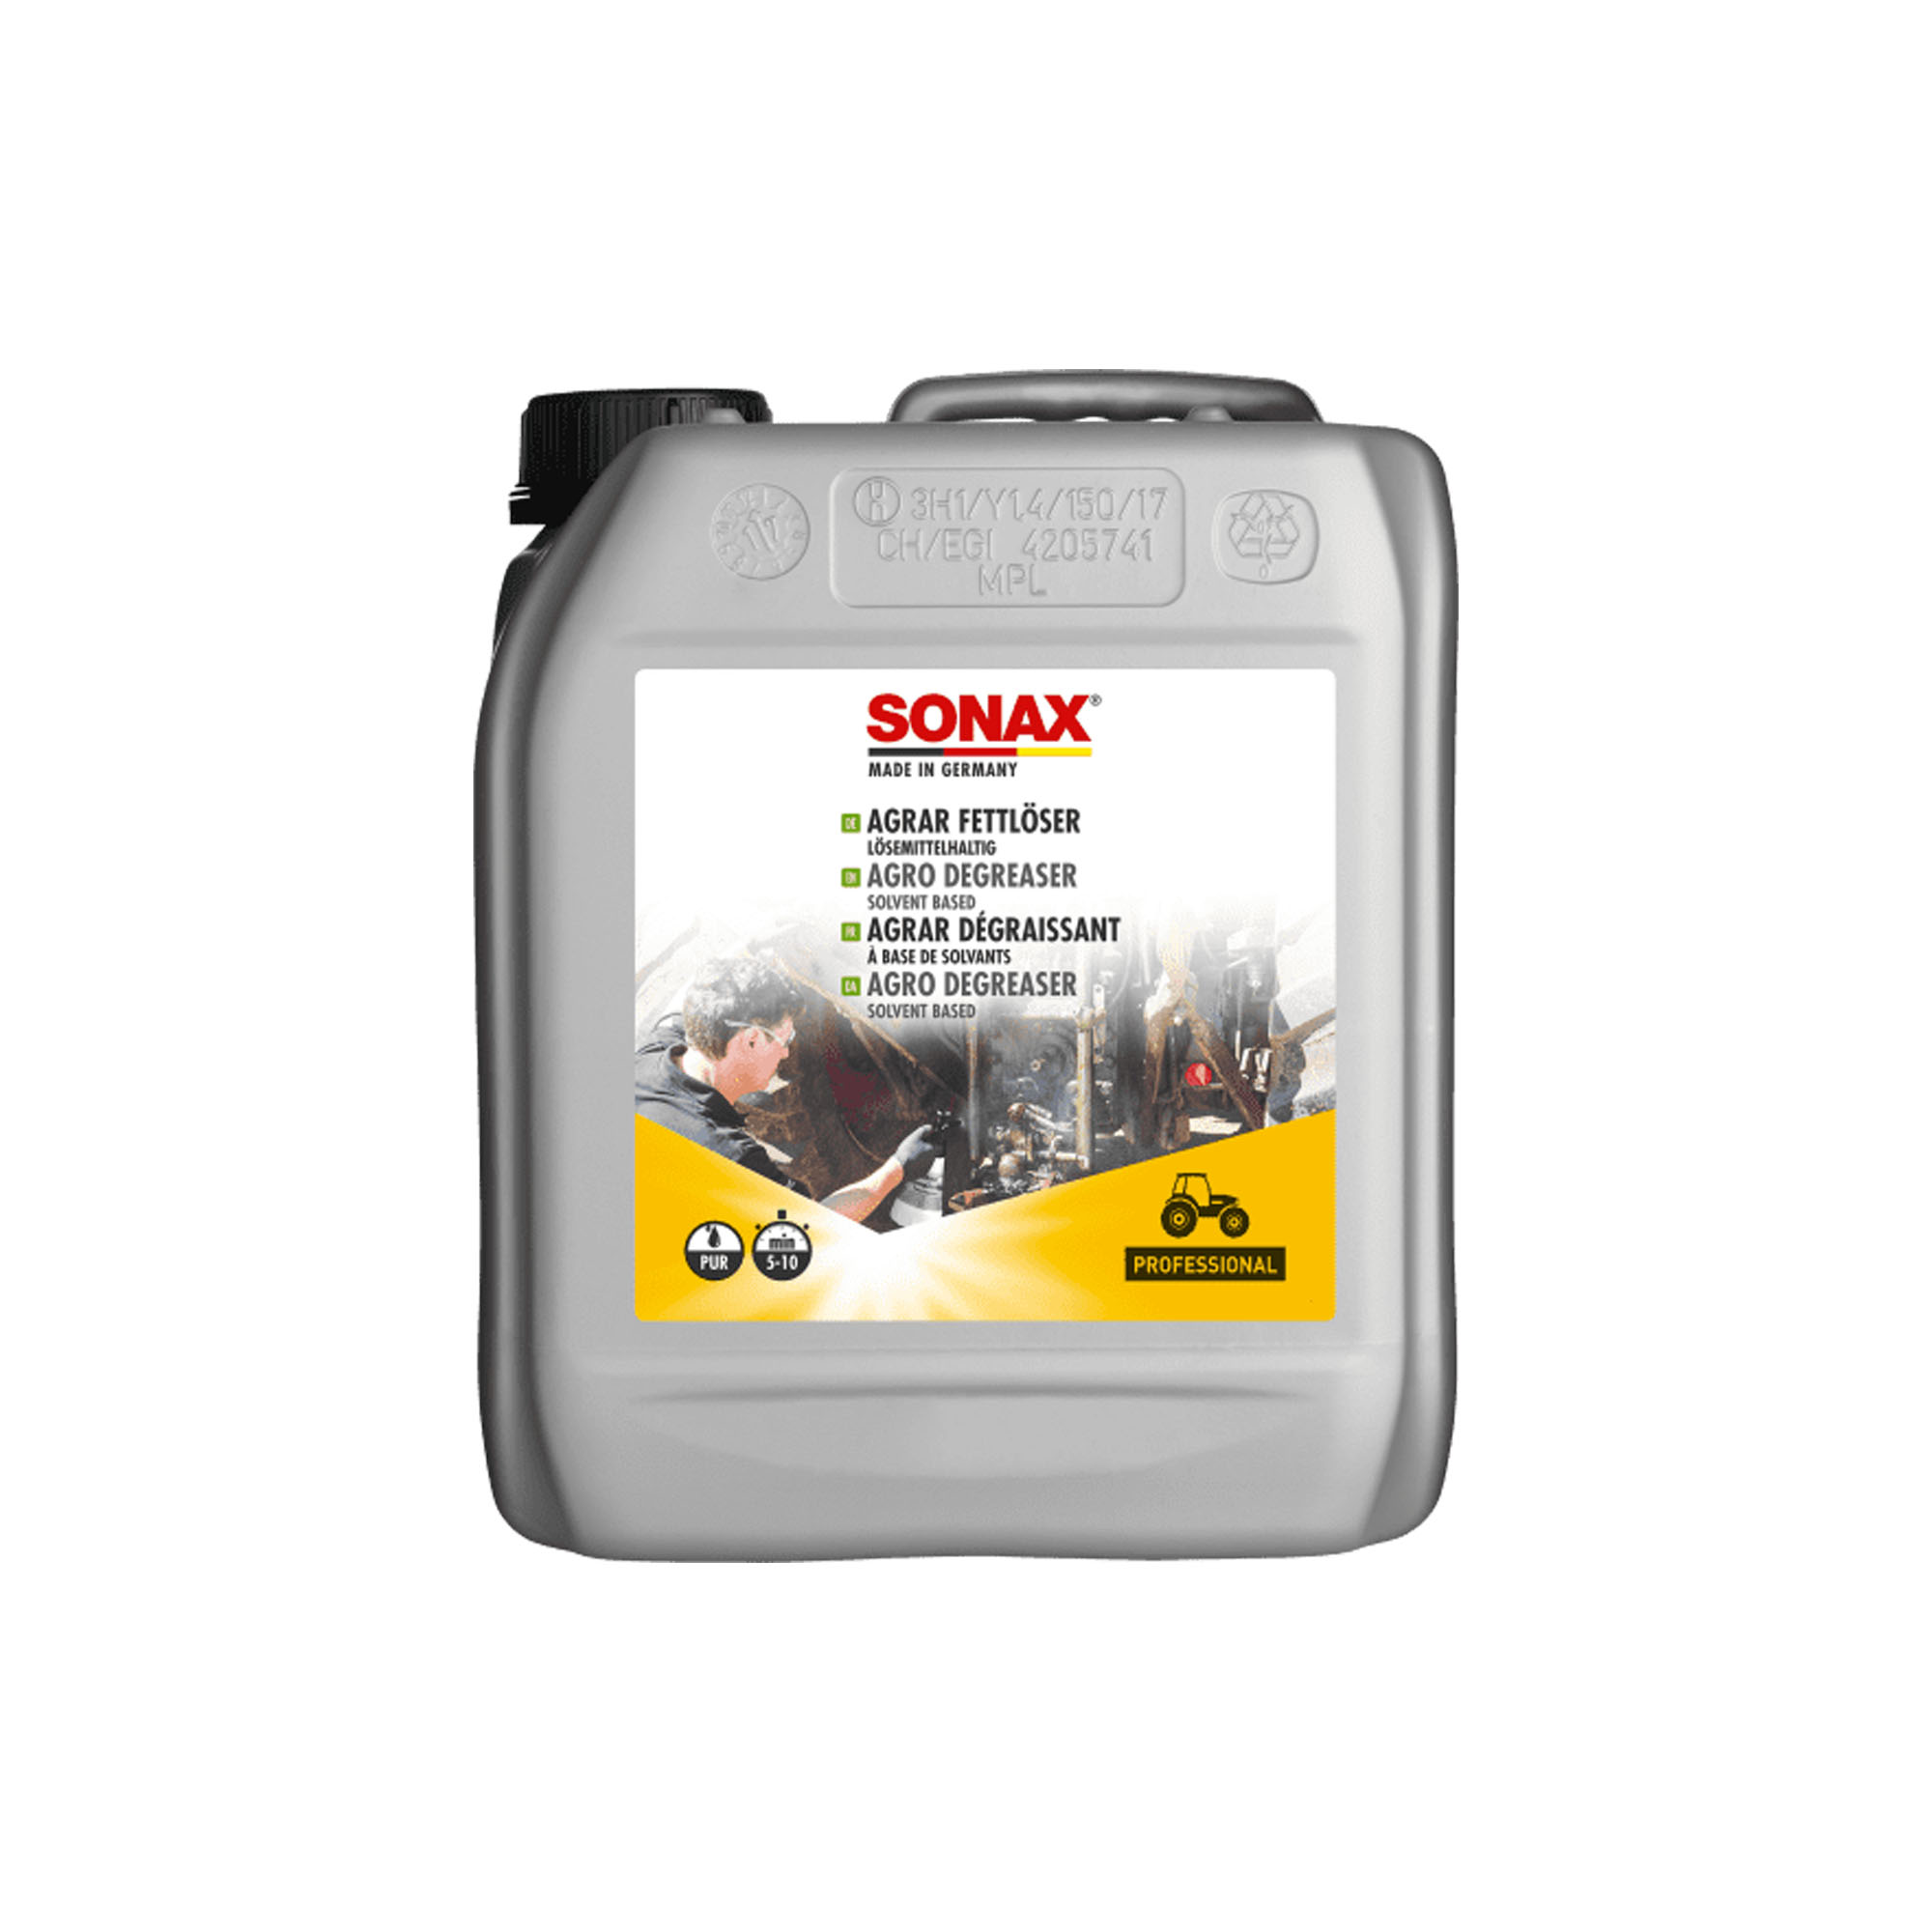 Sonax Agro Degreaser